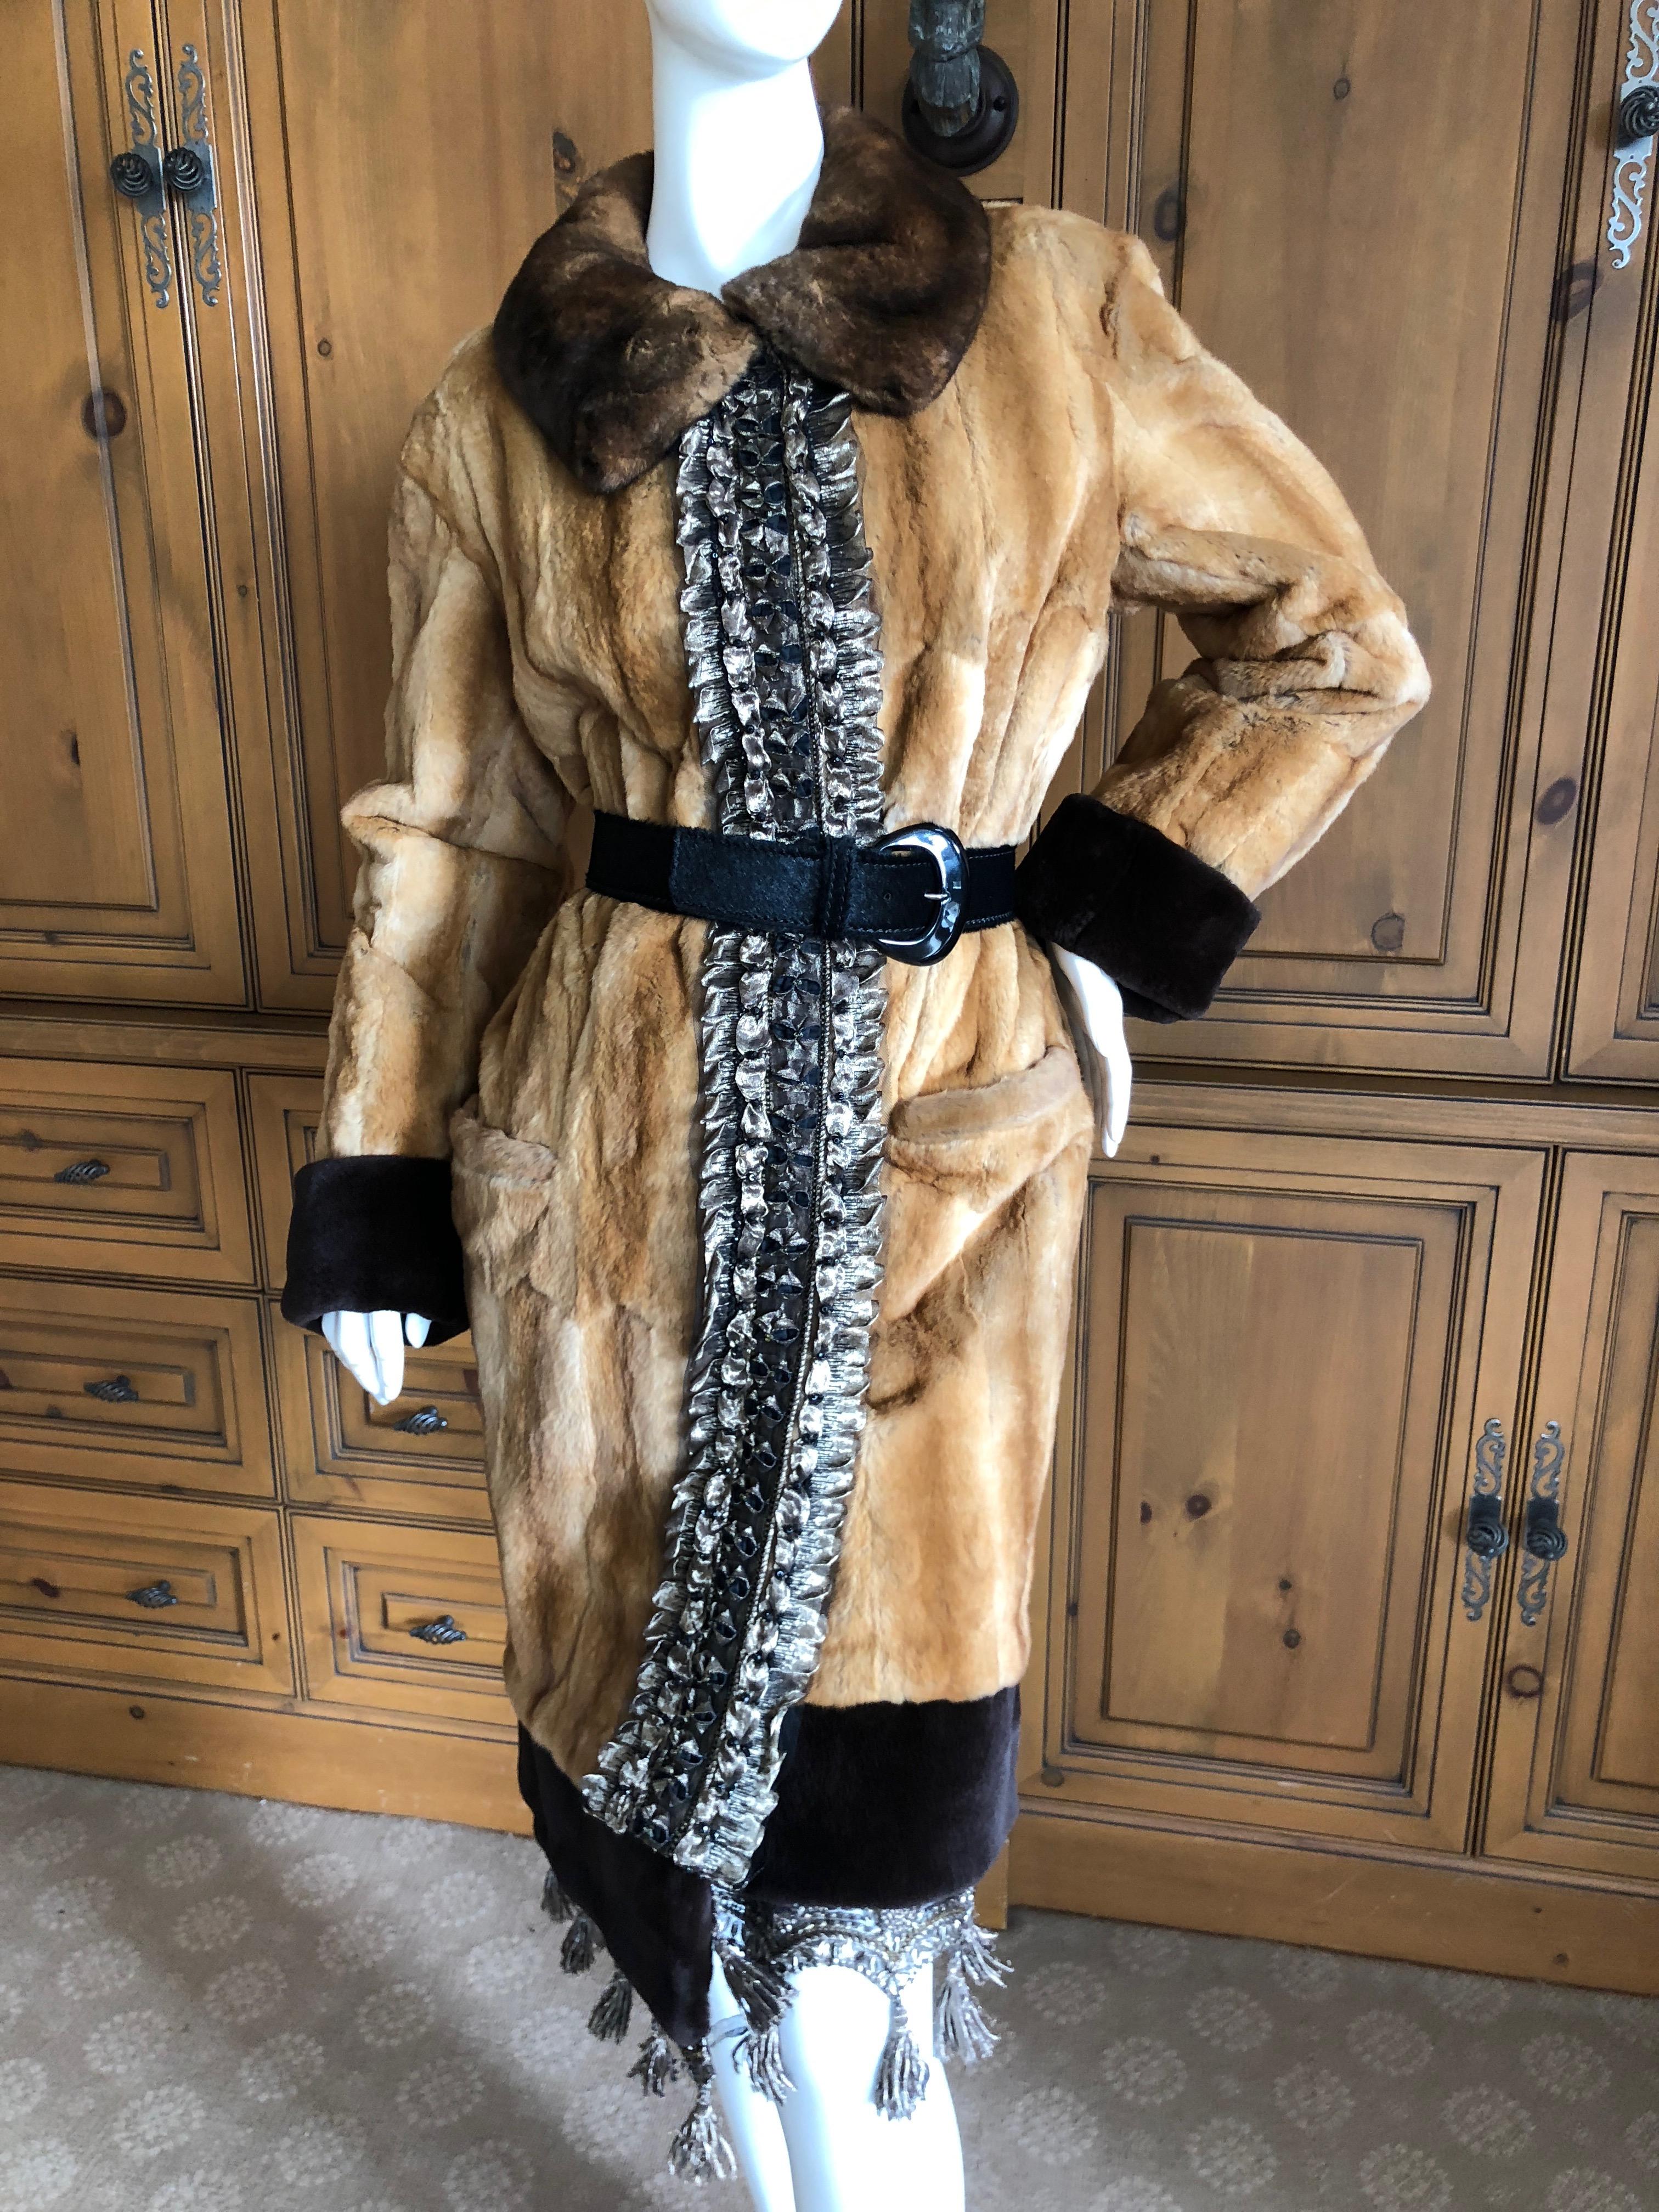 Yves Saint Laurent Luxurious Embellished Chinchilla Fur Coat In Excellent Condition For Sale In Cloverdale, CA